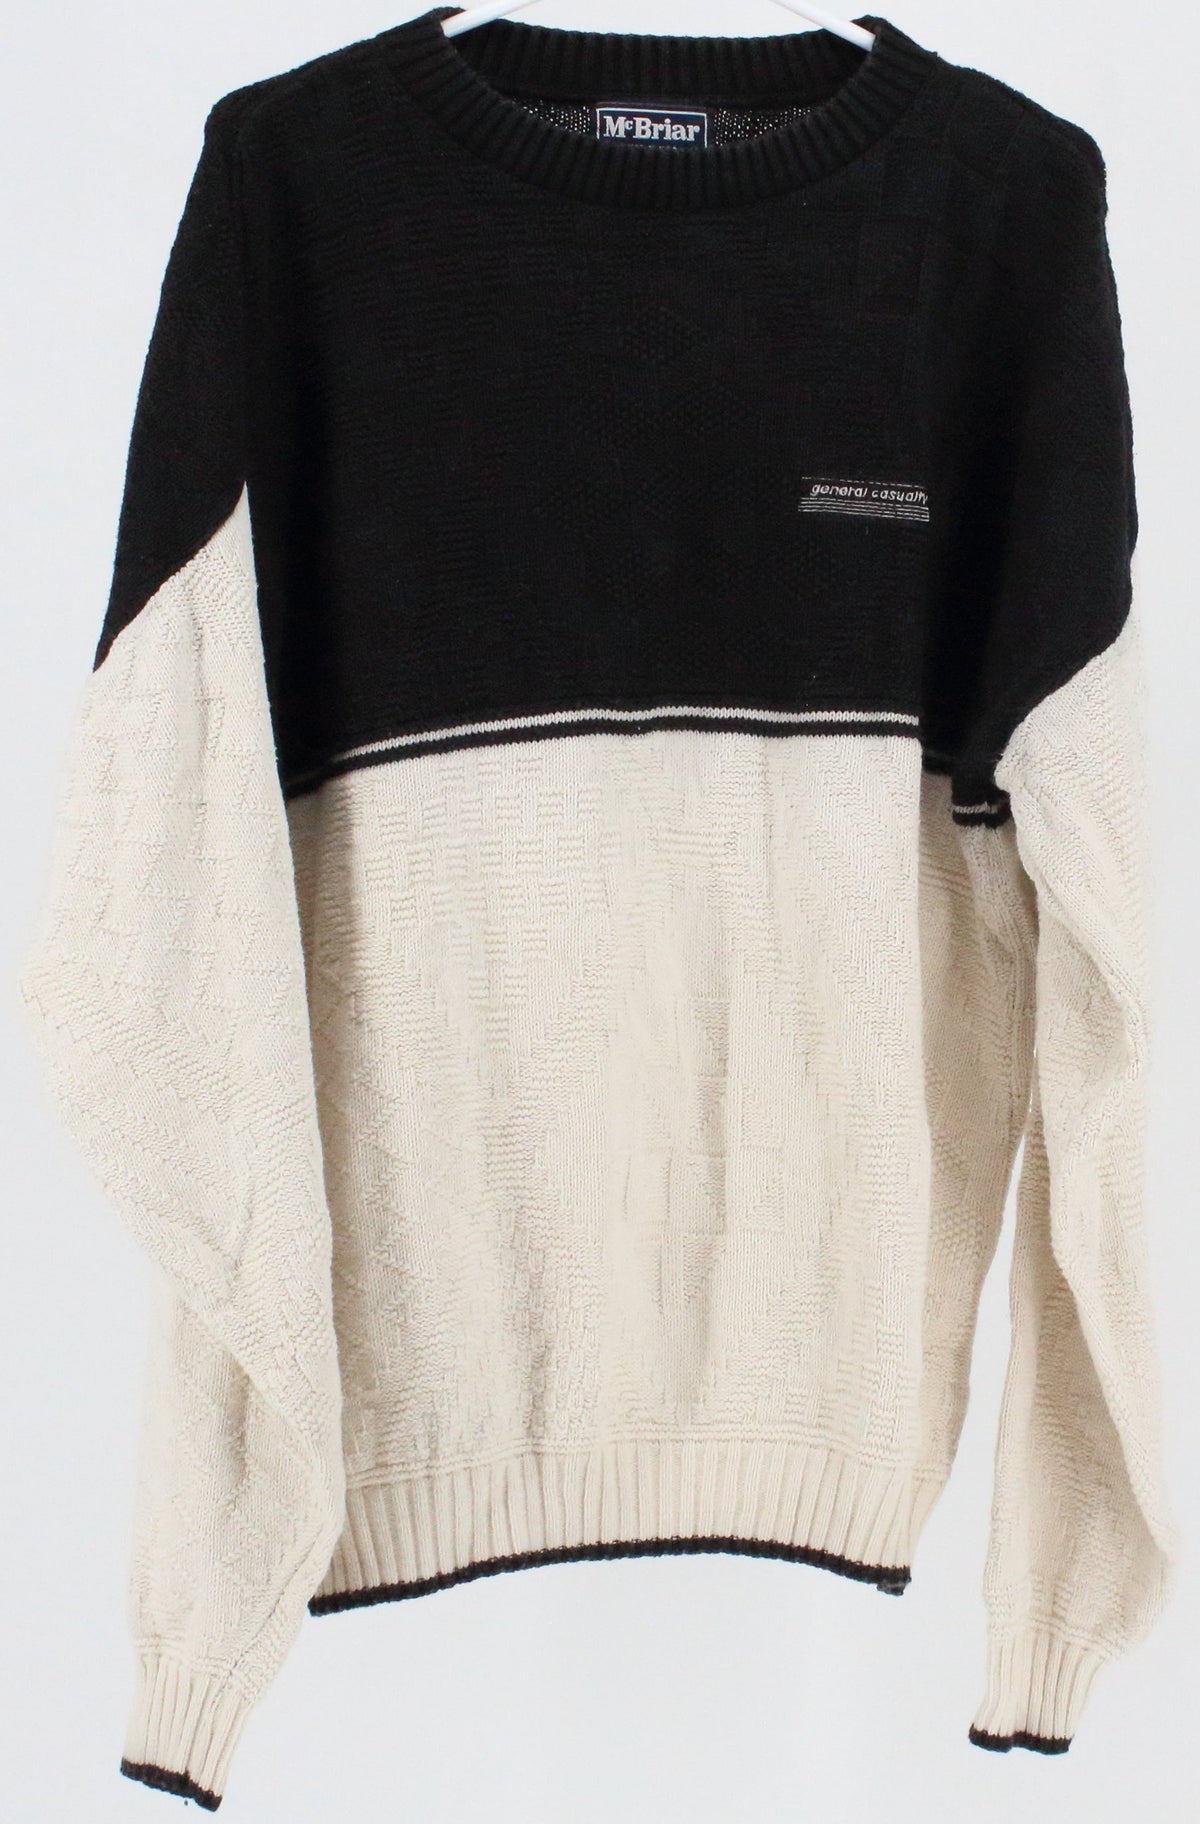 Mc Briar General Casualty Black and Off White Men's Sweater